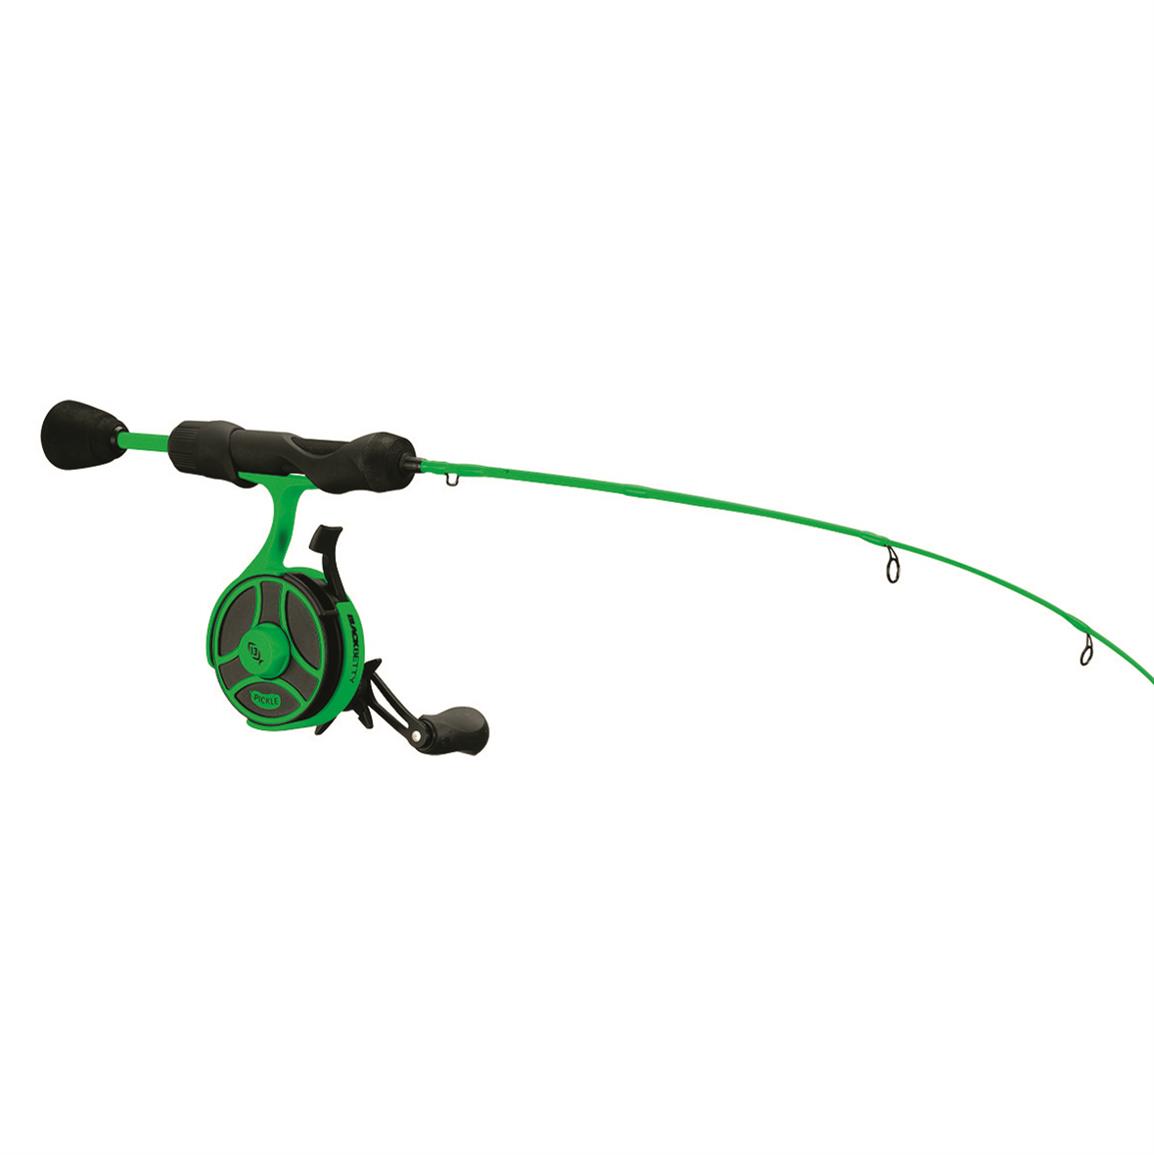 13 Fishing Snitch Pro/FreeFall Ghost Rod and Reel Ice Fishing Combo, 23  Length, Left-Hand Retrieve - 728906, Ice Fishing Combos at Sportsman's Guide